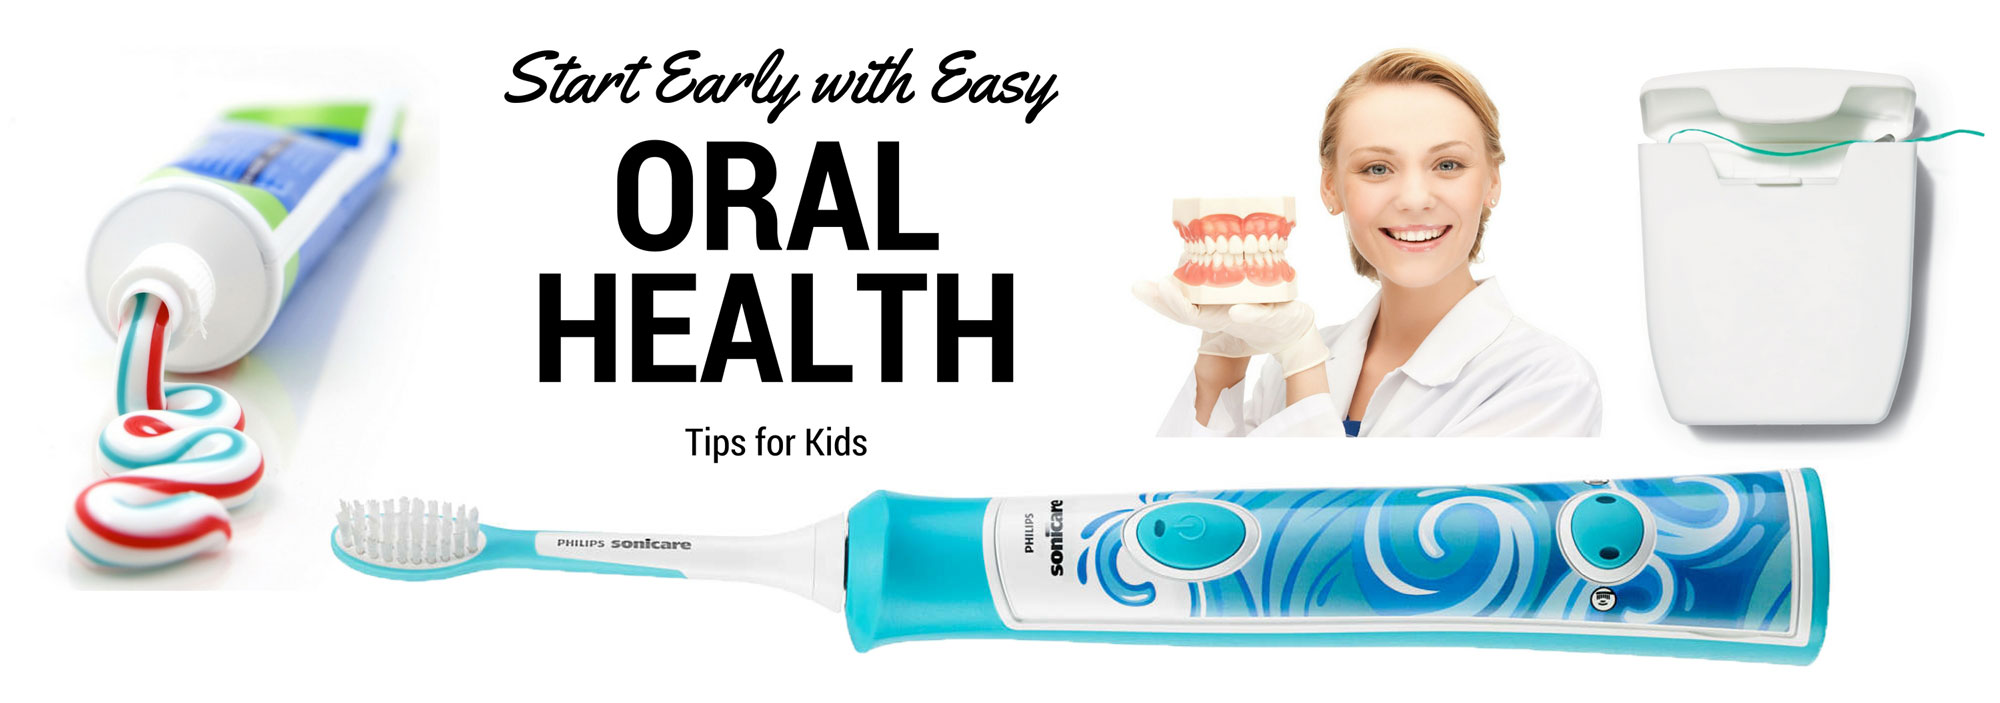 New Zealand's Top Mummy Blogger Parenting Travel Blog Family Easy Oral Health Tips for Kids